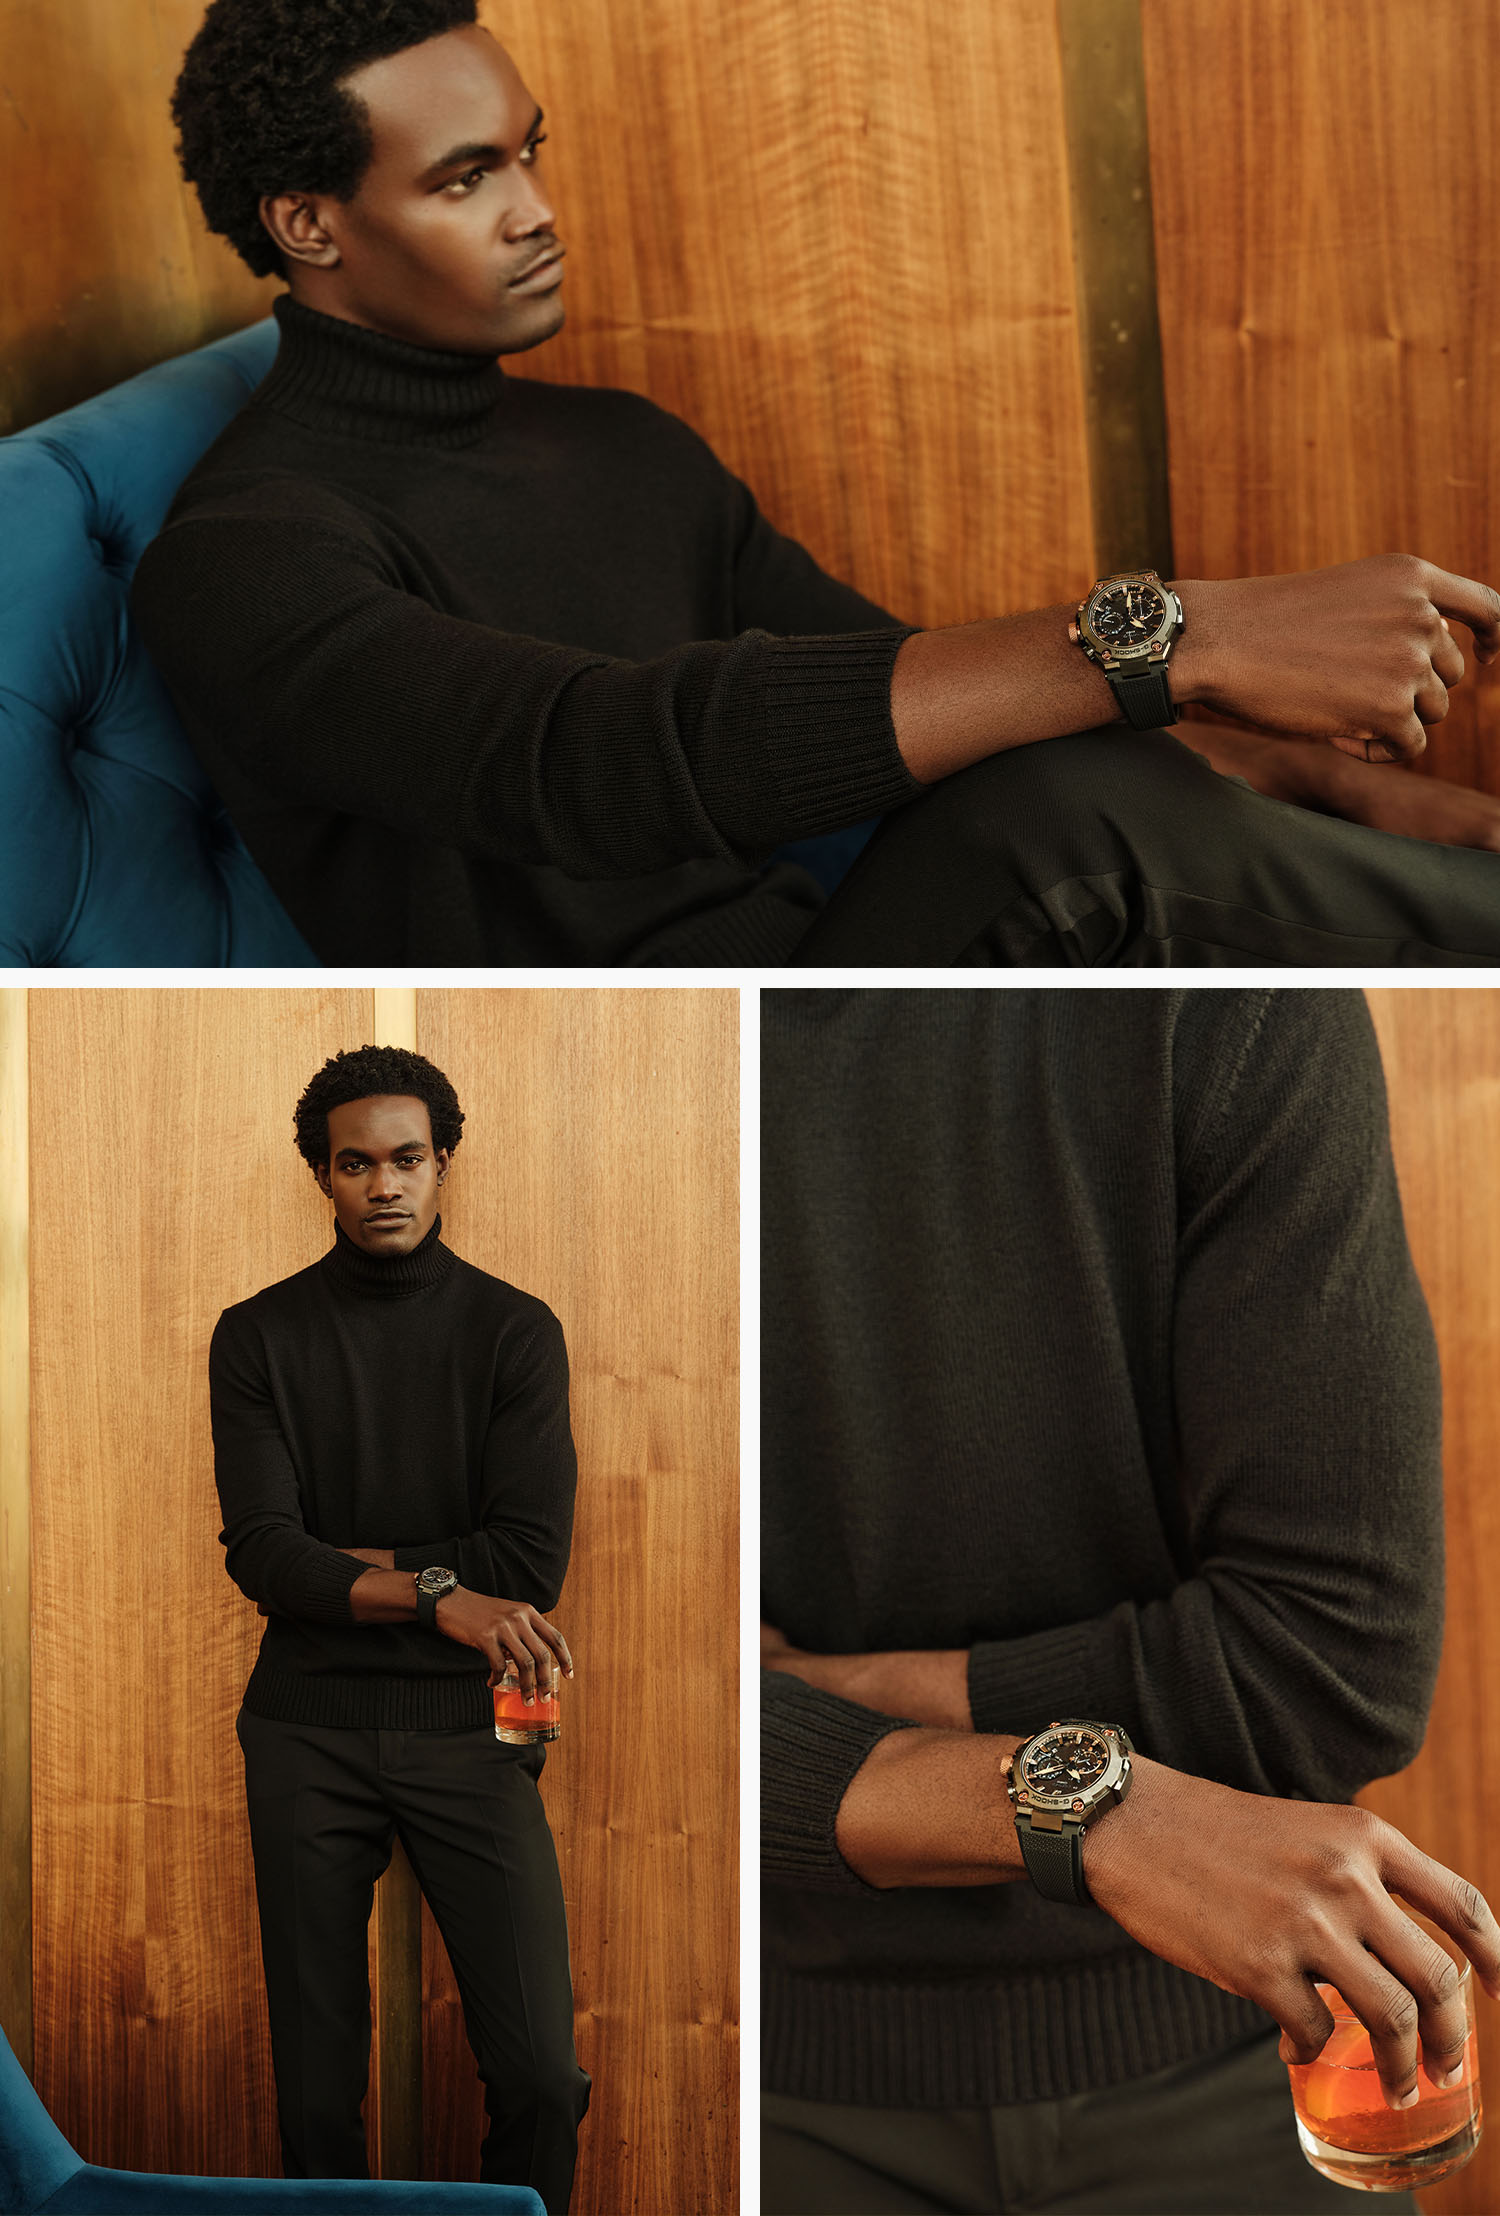 handsome man in hotel bar wearing a black turtleneck sweater, black slacks and a casio g shock watch, holding an old fashioned cocktail